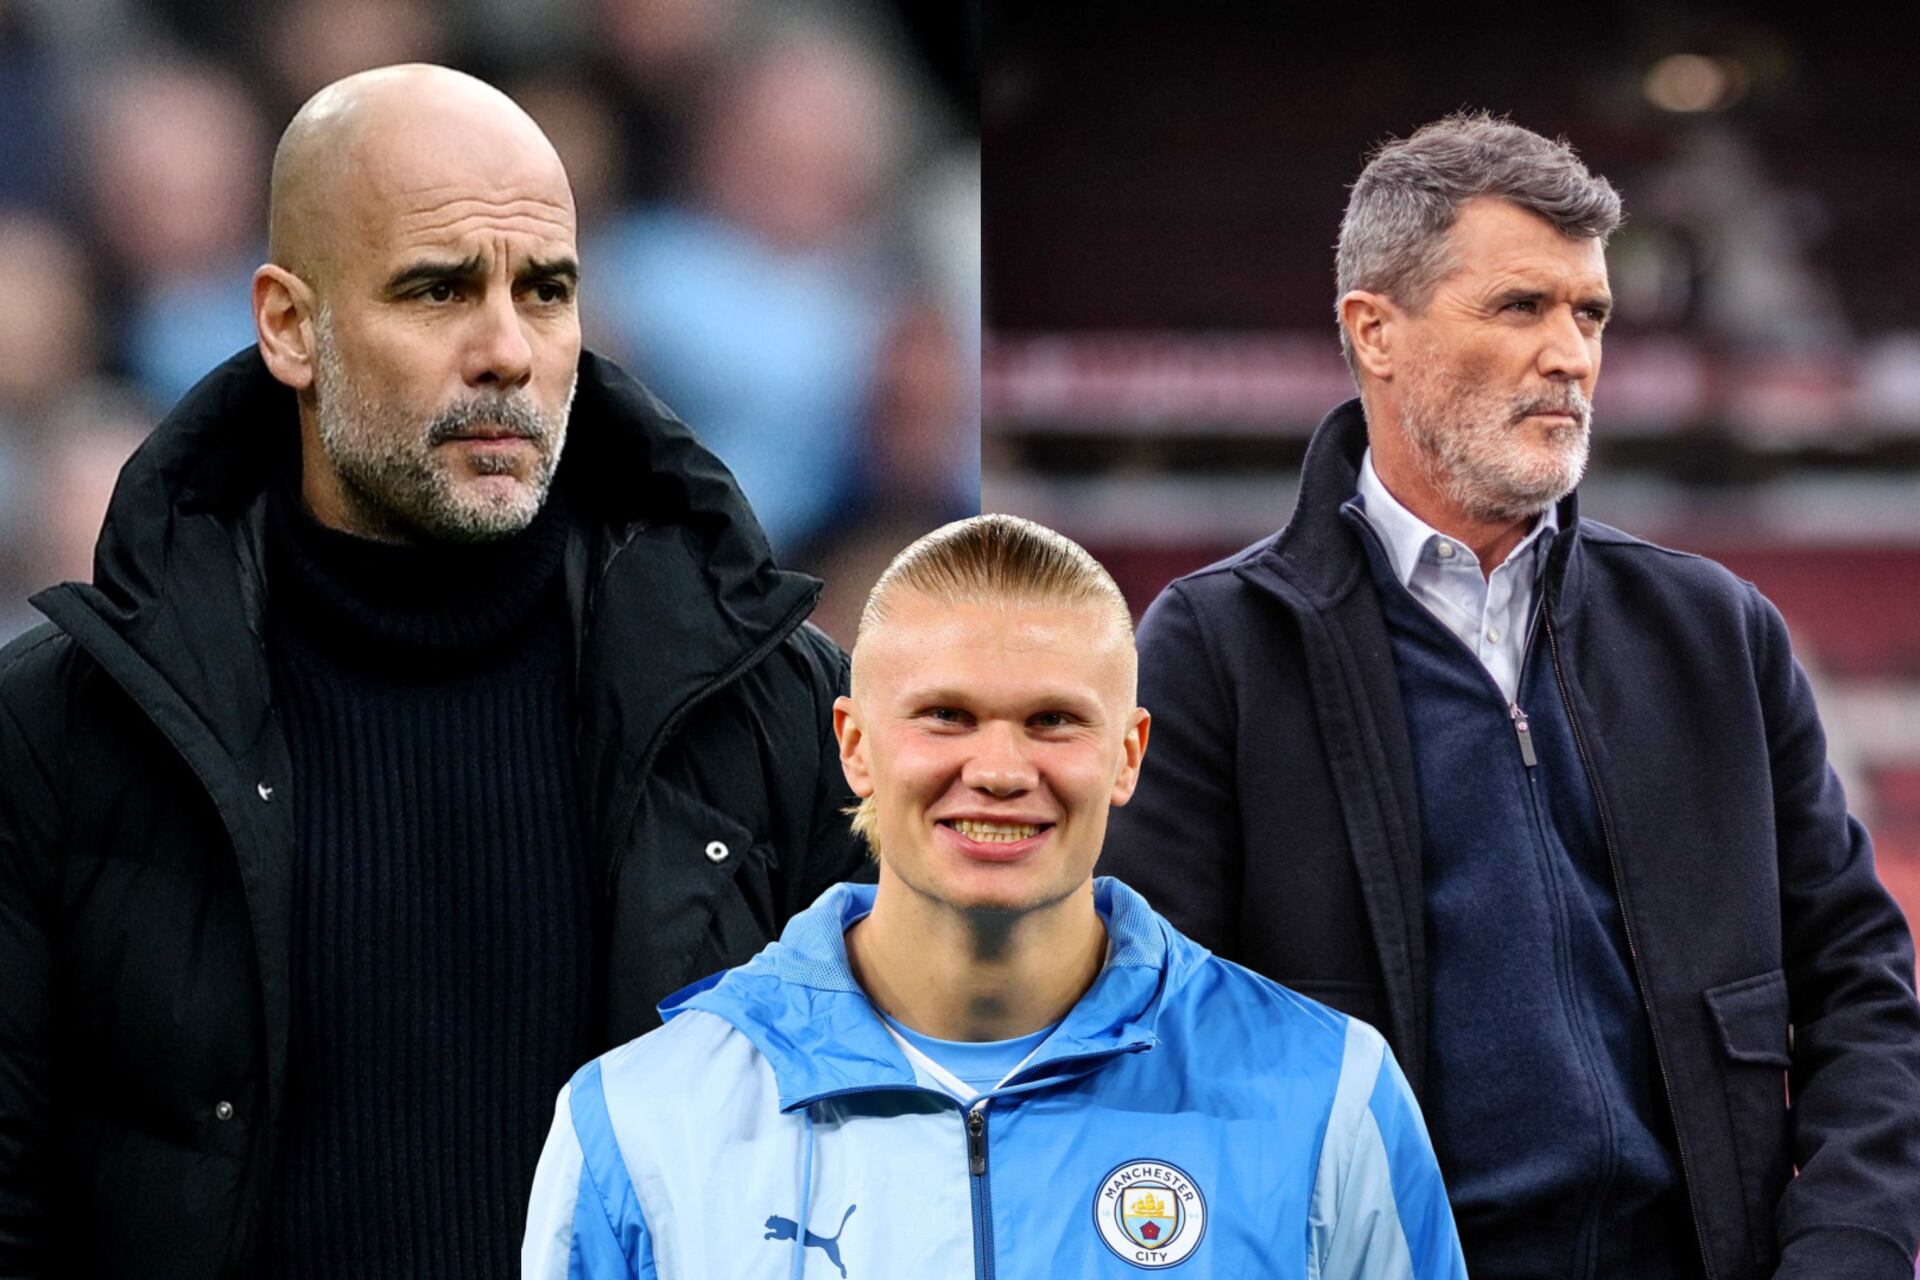 Guardiola boldly responds to Keane calling Haaland a "League Two player"